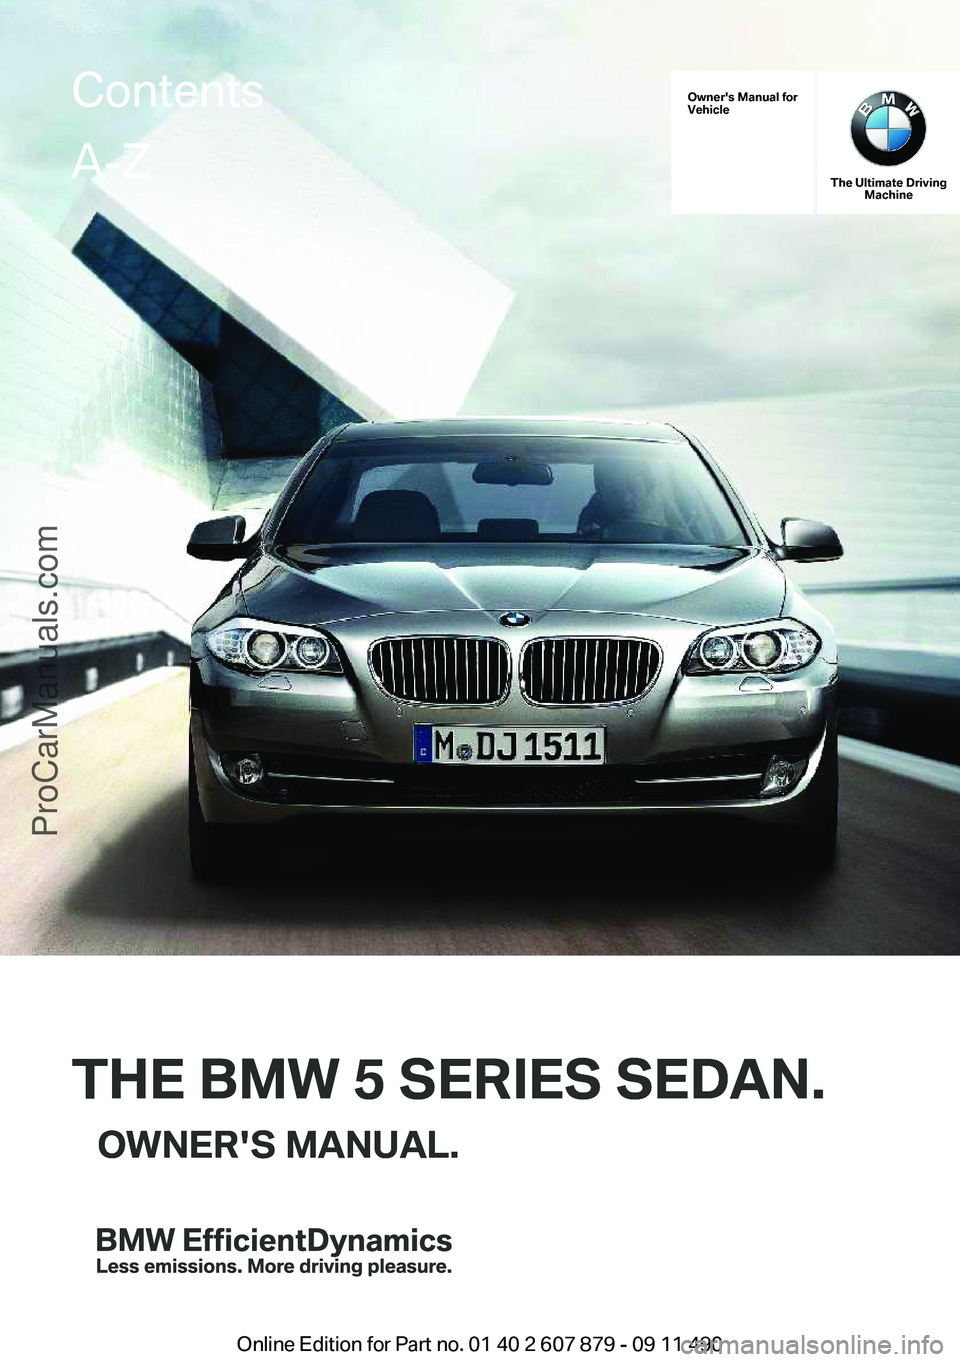 BMW 5 SERIES 2012  Owners Manual Owner's Manual for
Vehicle
THE BMW 5 SERIES SEDAN.OWNER'S MANUAL.
The Ultimate Driving Machine
THE BMW 5 SERIES SEDAN.OWNER'S MANUAL.
ContentsA-Z
Online Edition for Part no. 01 40 2 607 87